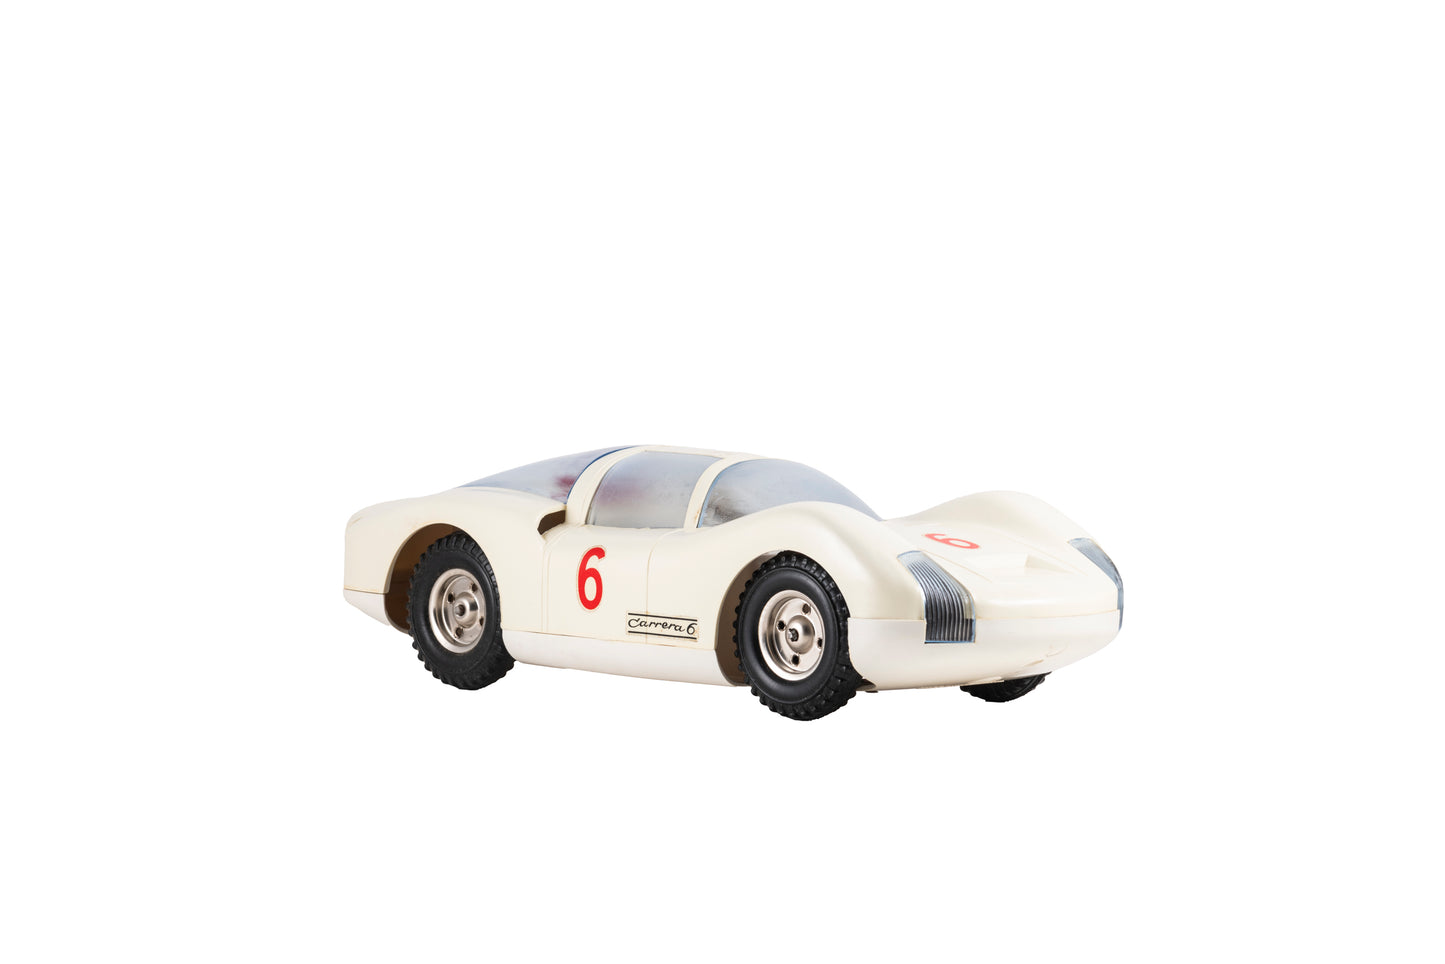 Porsche Carrera 6 Friction Toy from Strenco